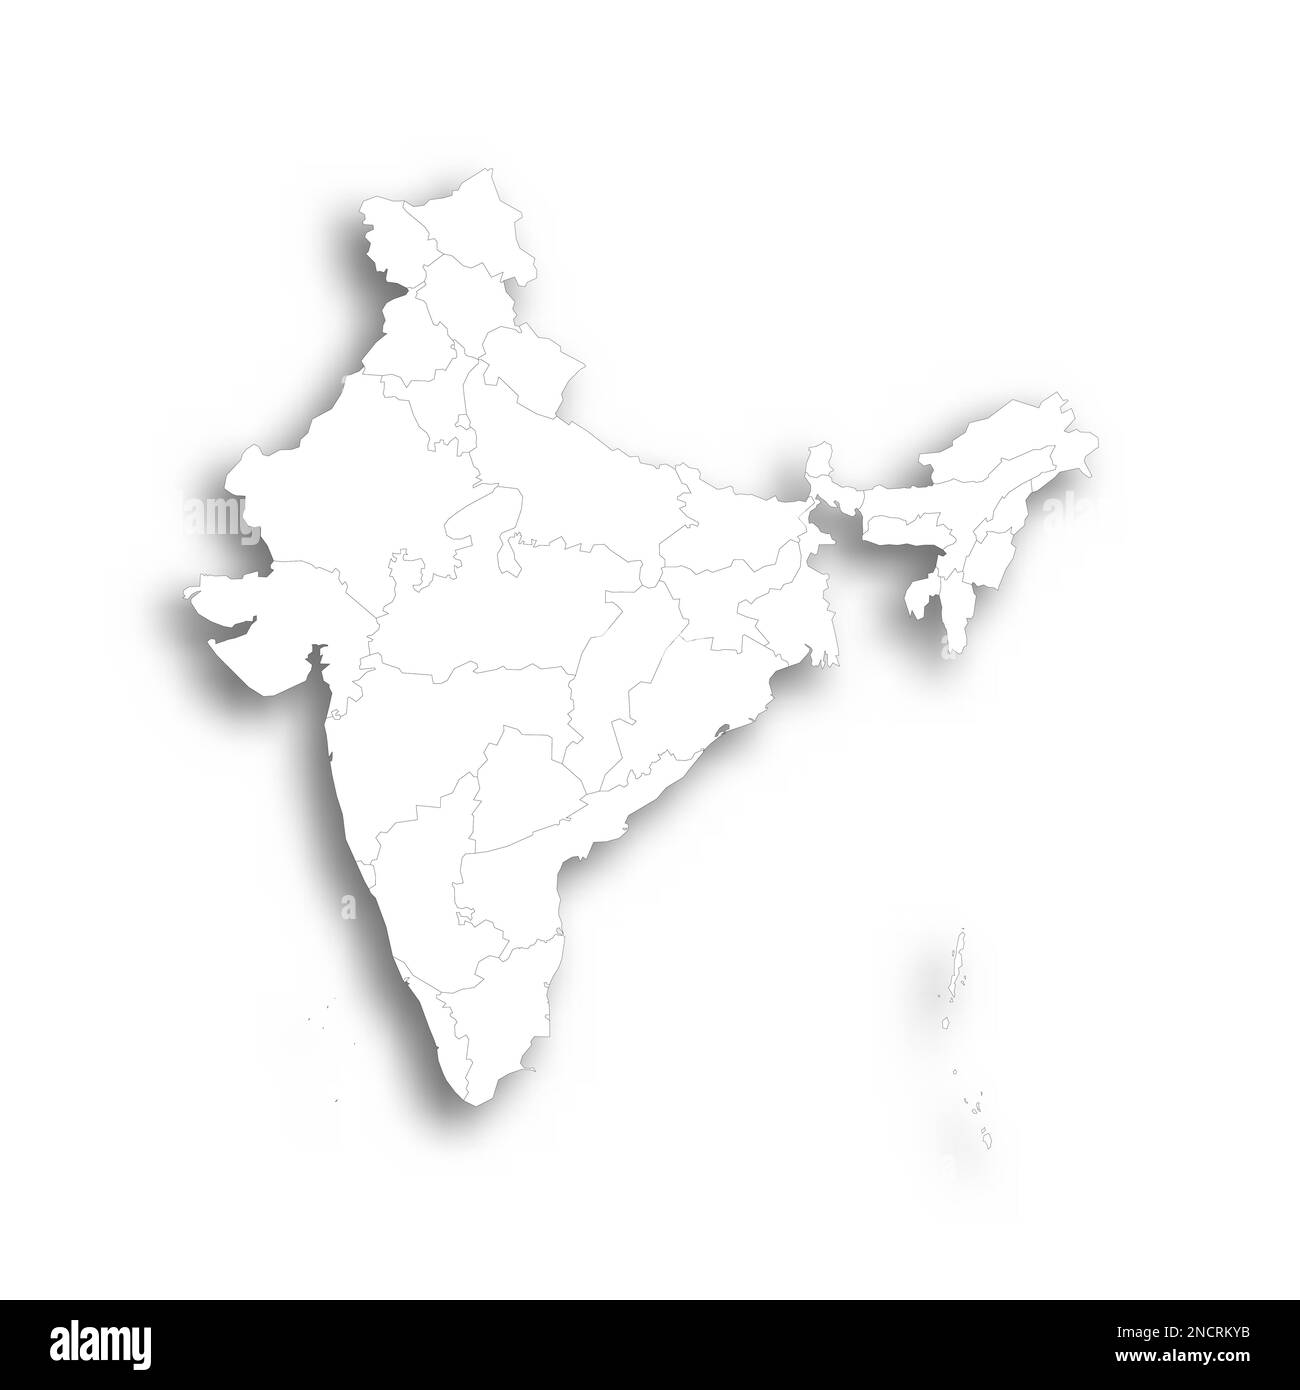 India political map of administrative divisions - states and union teritorries. Flat white blank map with thin black outline and dropped shadow. Stock Vector